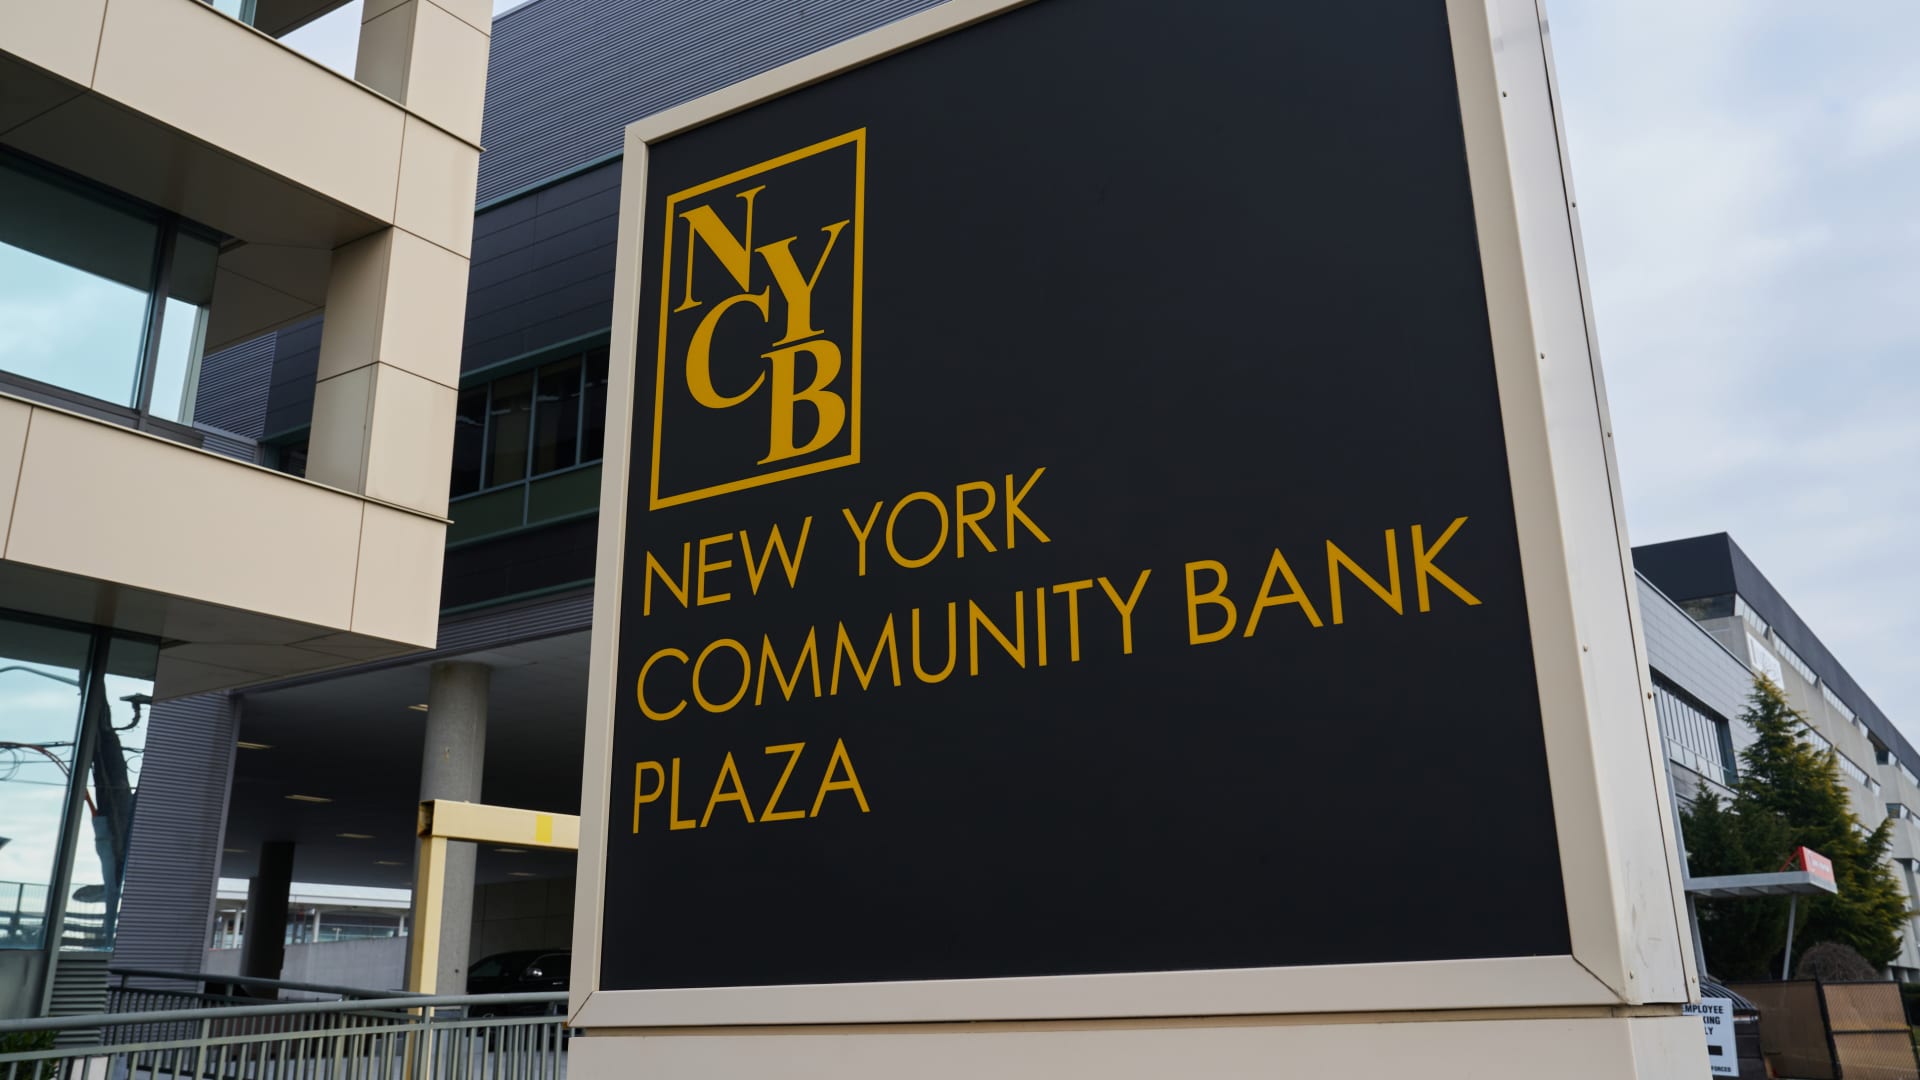 NYCB shares whipsaw after financial institution appoints new chairman, following spiral on credit score downgrades